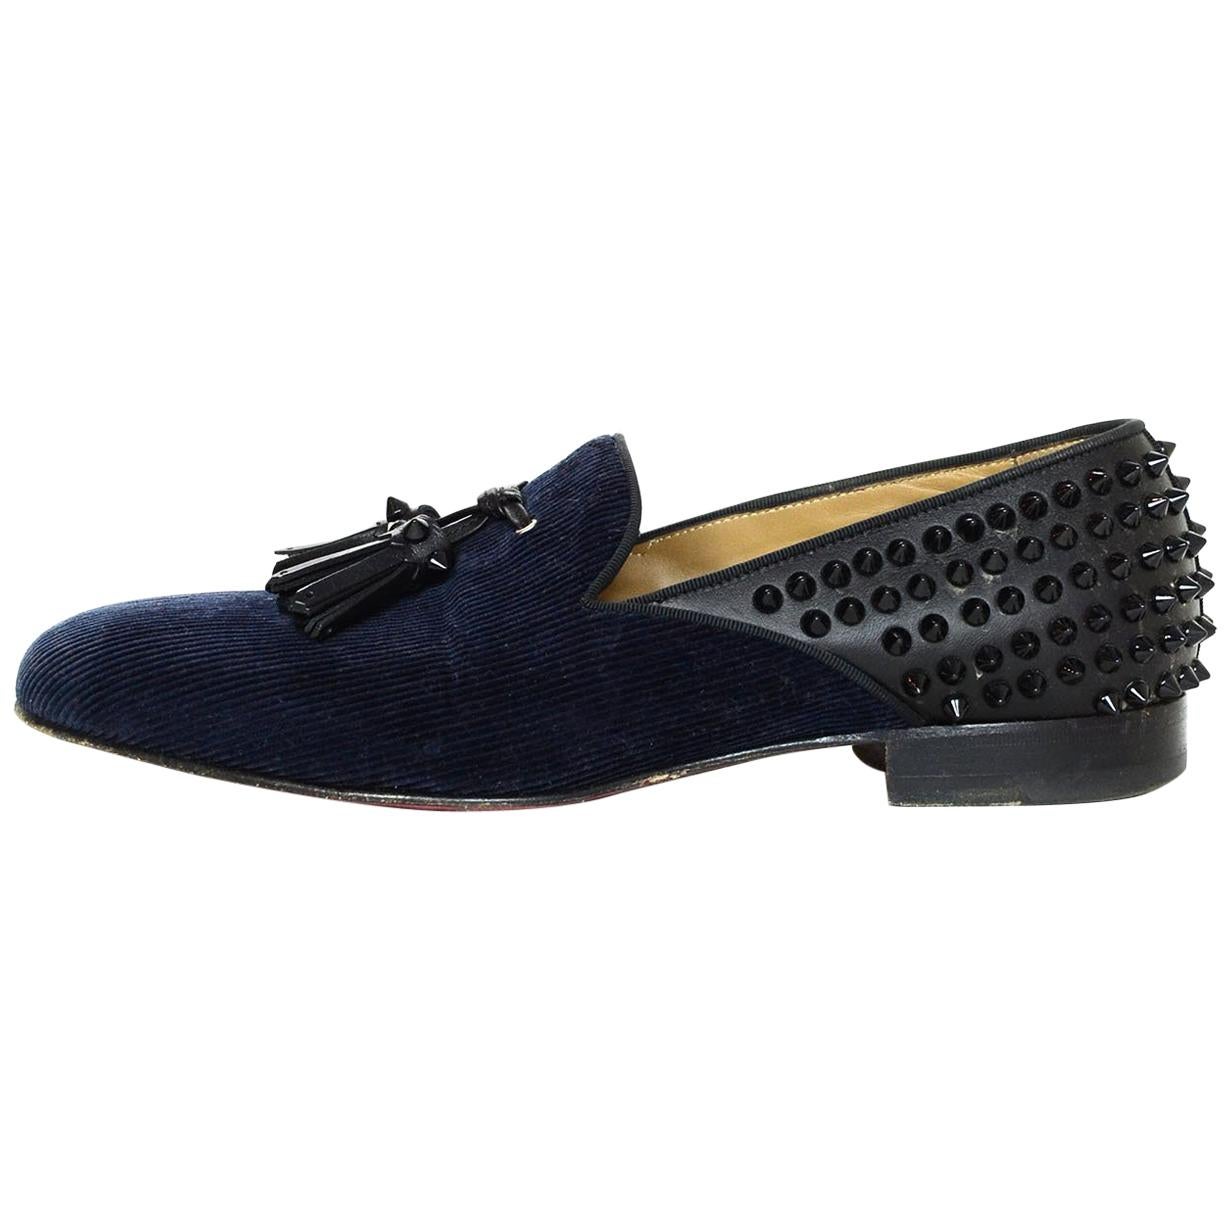 Stylin in men christian louboutin spiked loafers